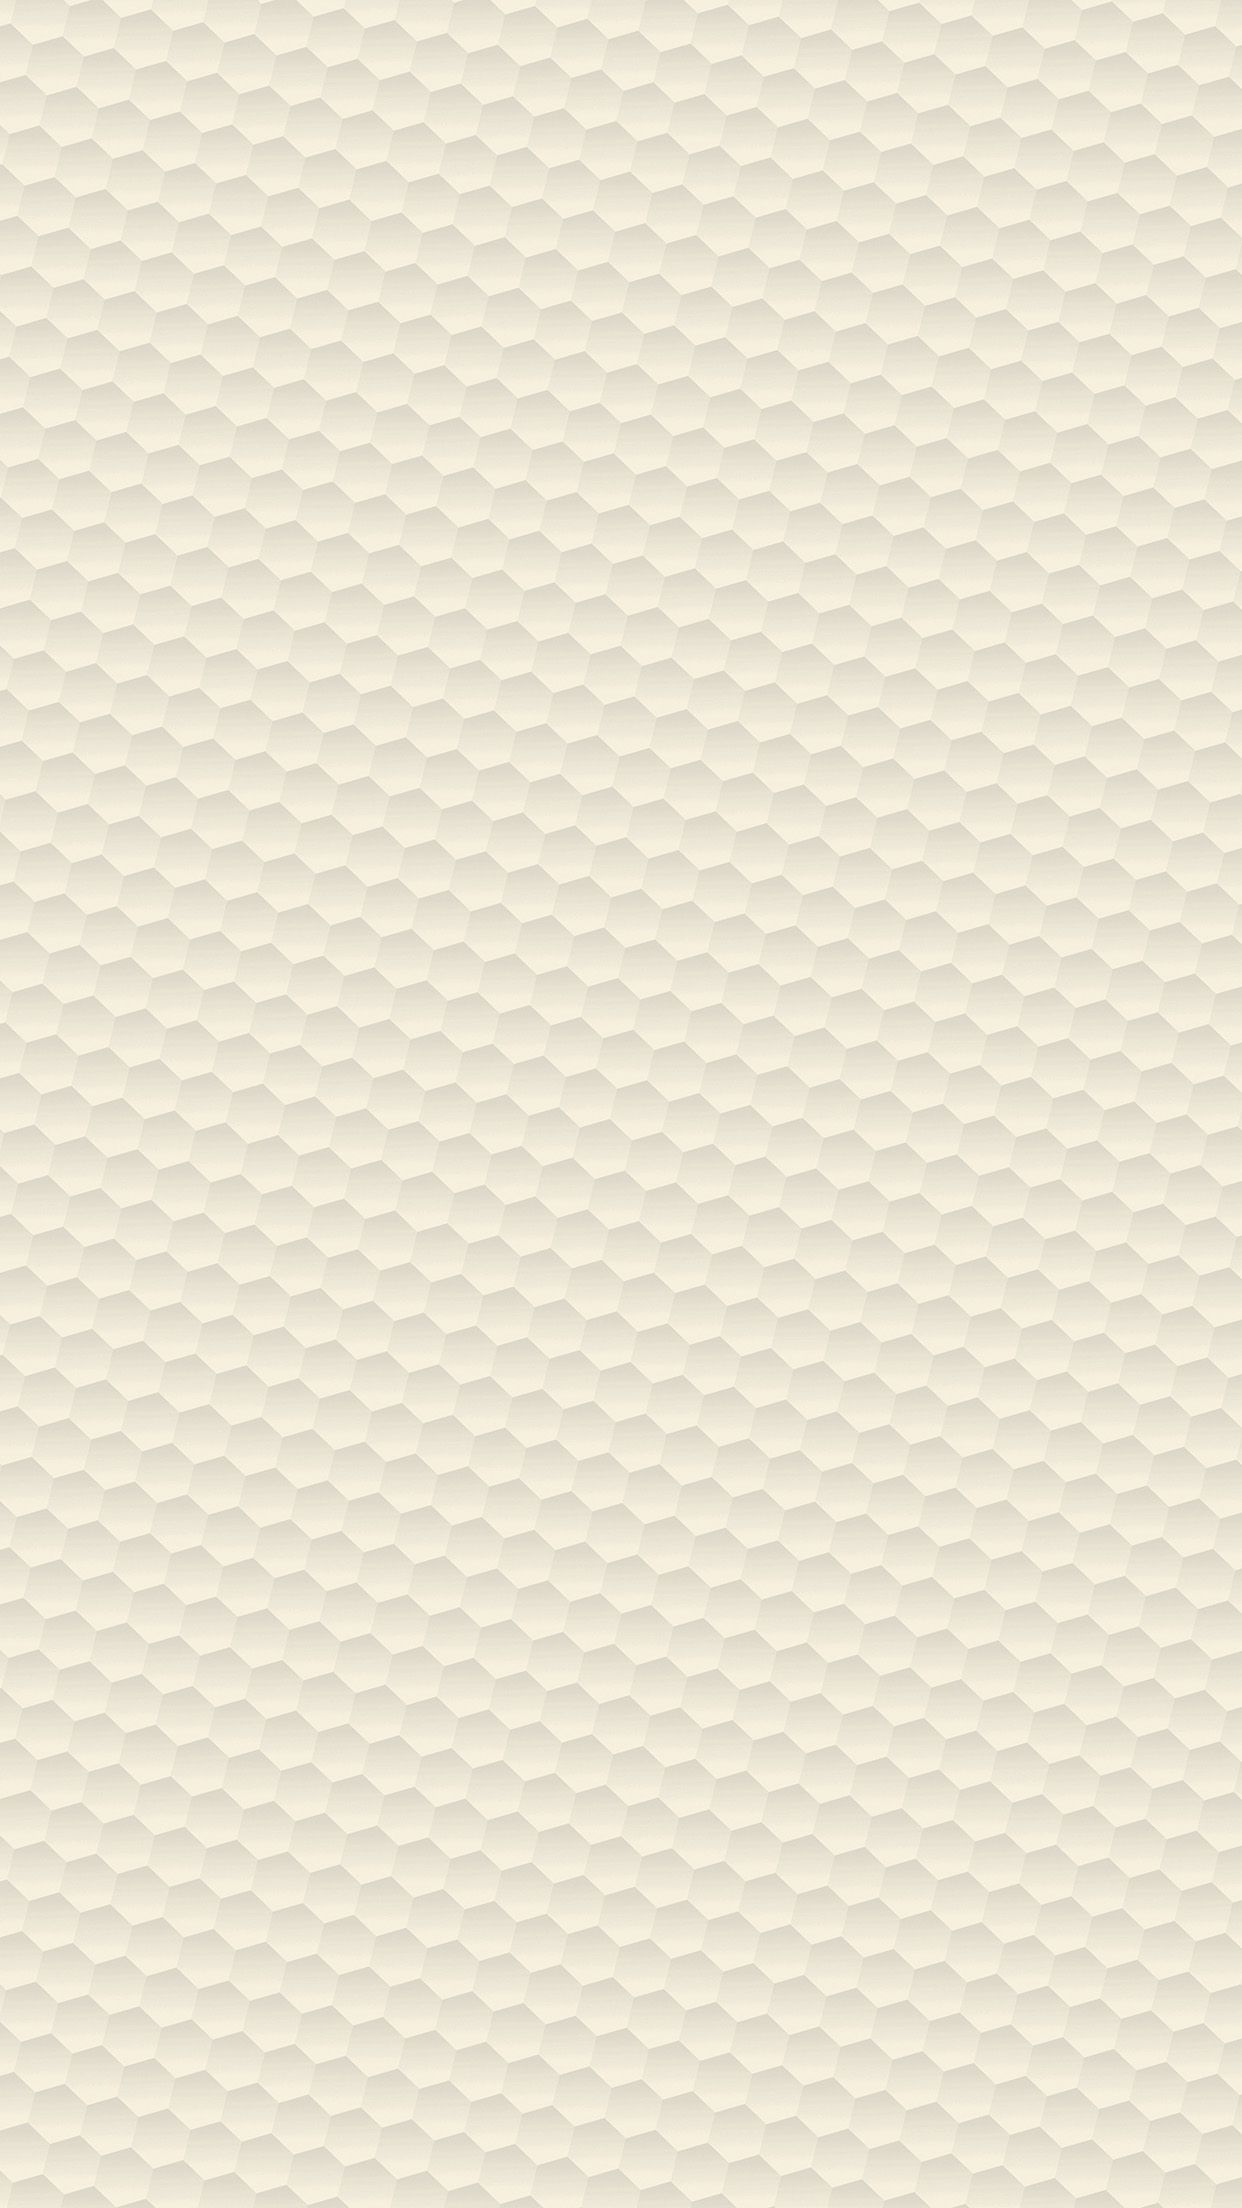 Honeycomb Dark Beige Poly Pattern Download Free HD Wallpaper for iPhone 6s, 7s, 8s, 10